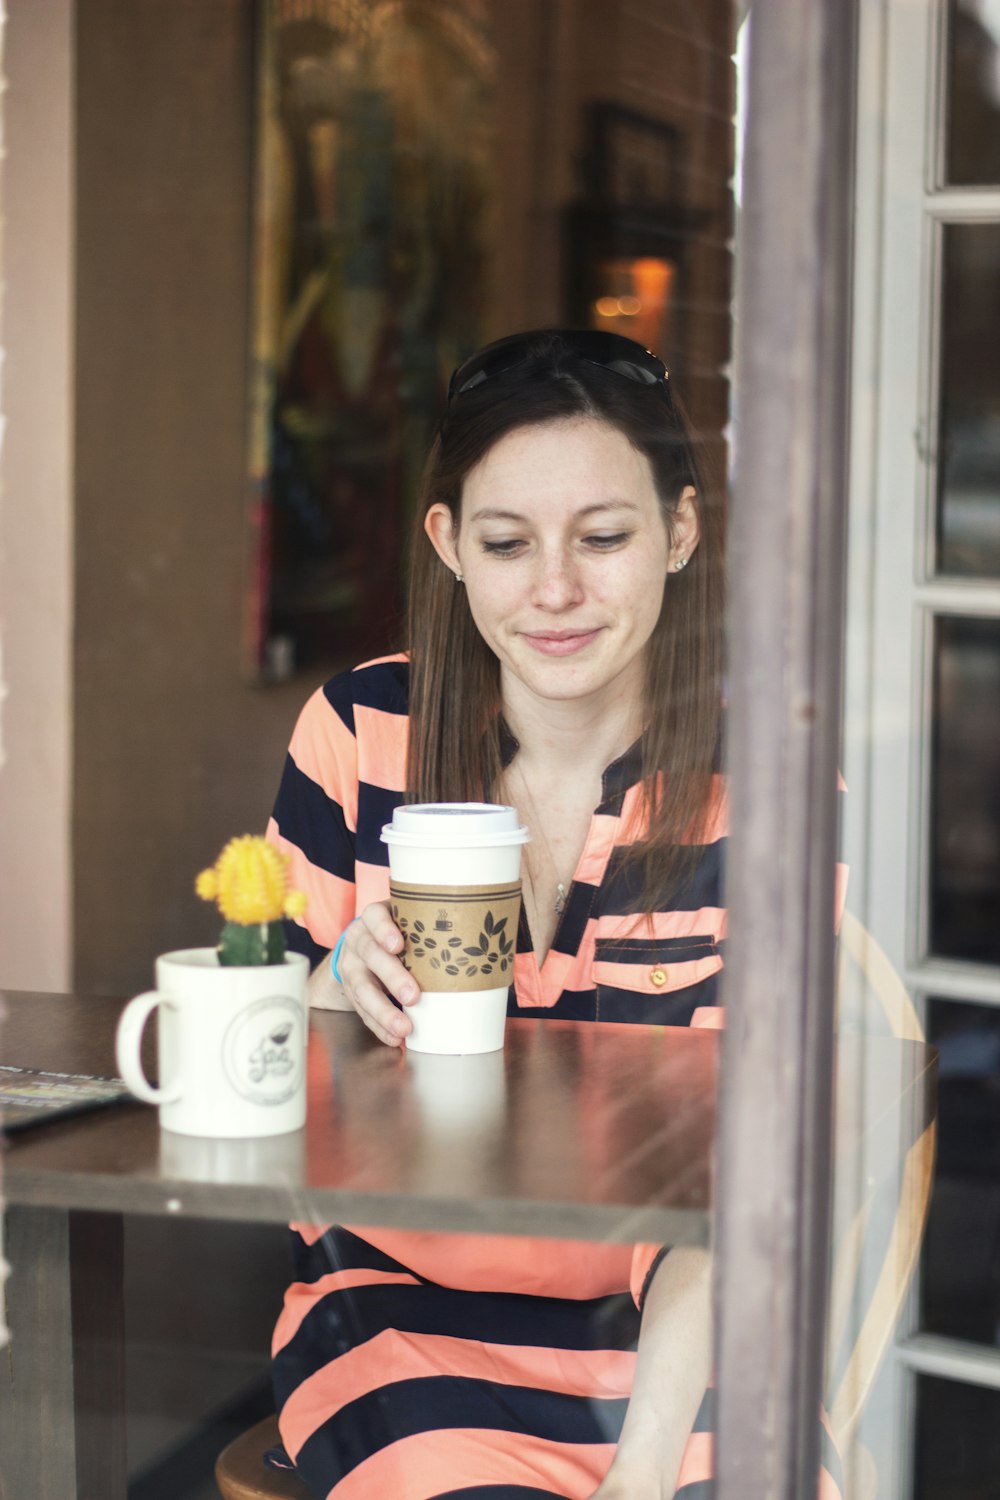 woman sitting down at table looking at cup in hand